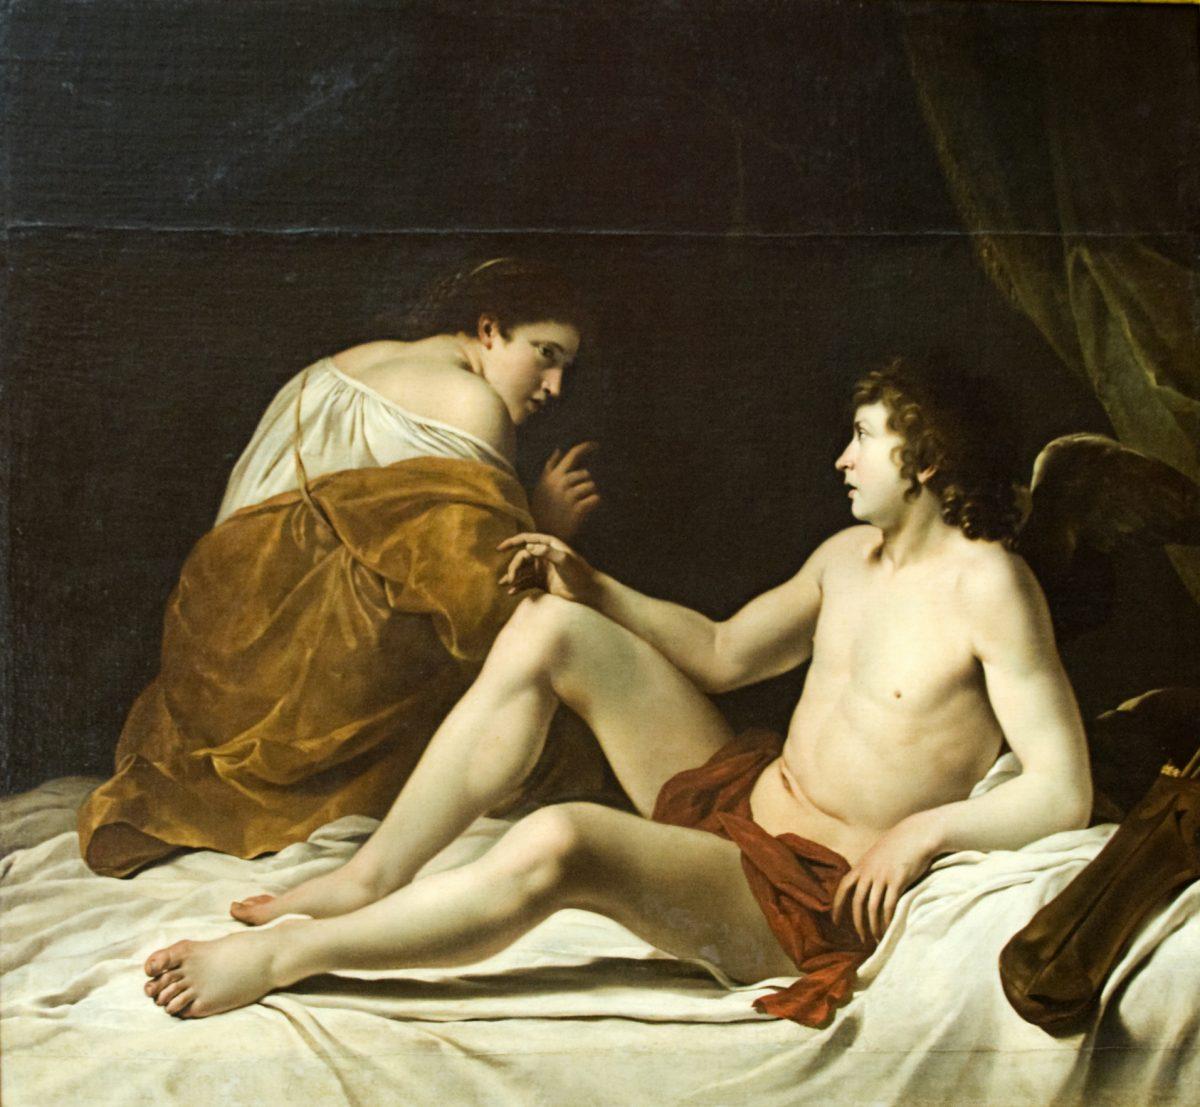 Psyche startles Cupid from his slumber. “Cupid and Psyche,” late 1610s, by Orazio Gentileschi. State Museum Fund. 1937. Hermitage Museum, St. Petersburg. (CC BY-SA 3.0)